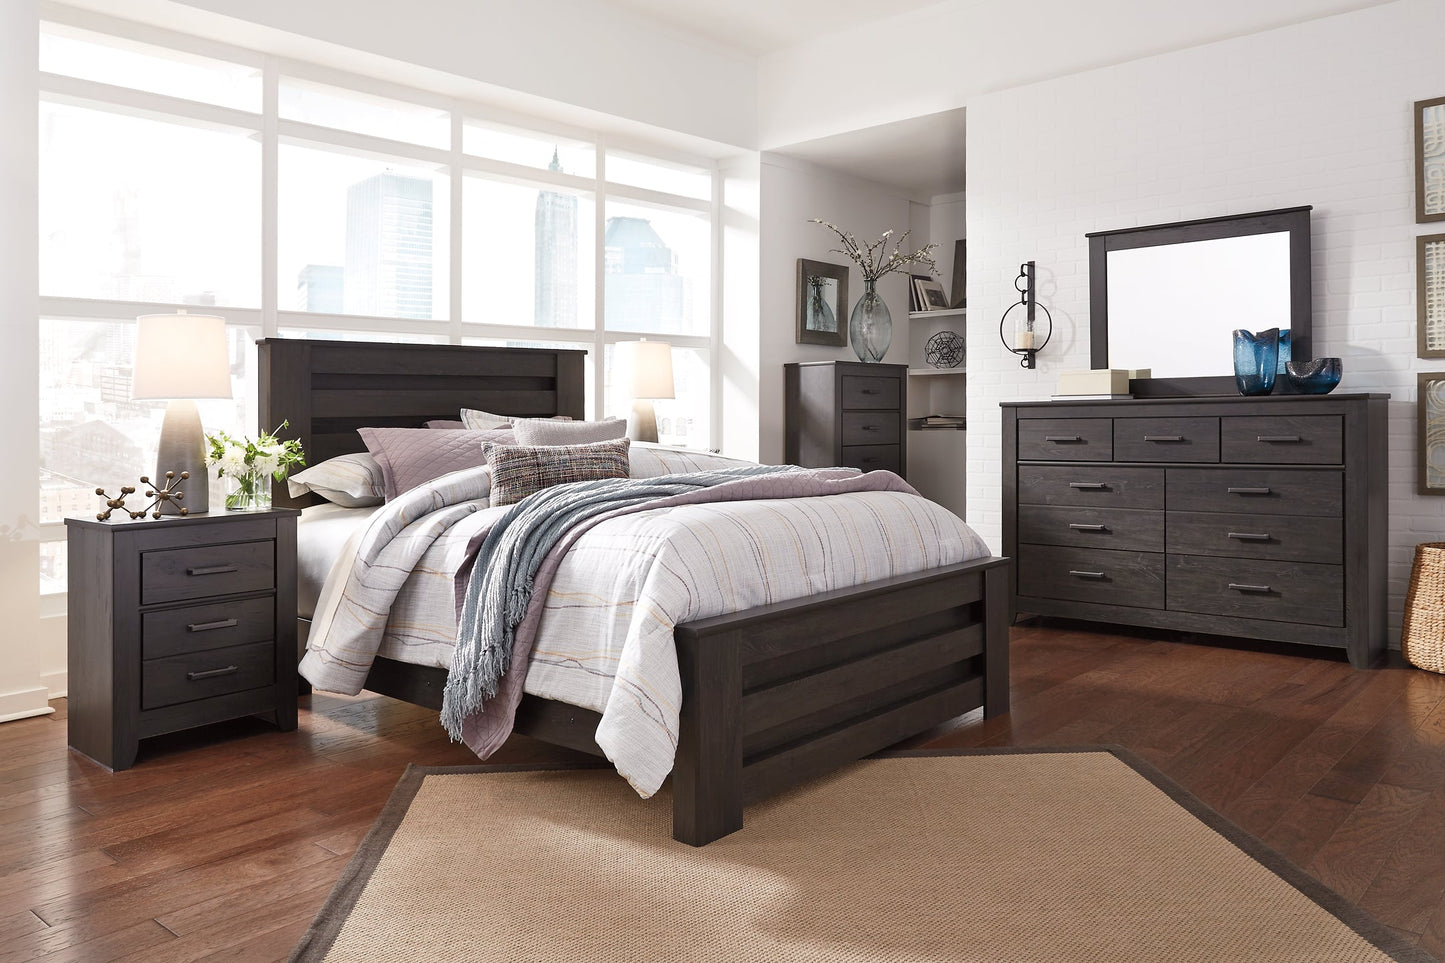 Brinxton Five Drawer Chest at Walker Mattress and Furniture Locations in Cedar Park and Belton TX.